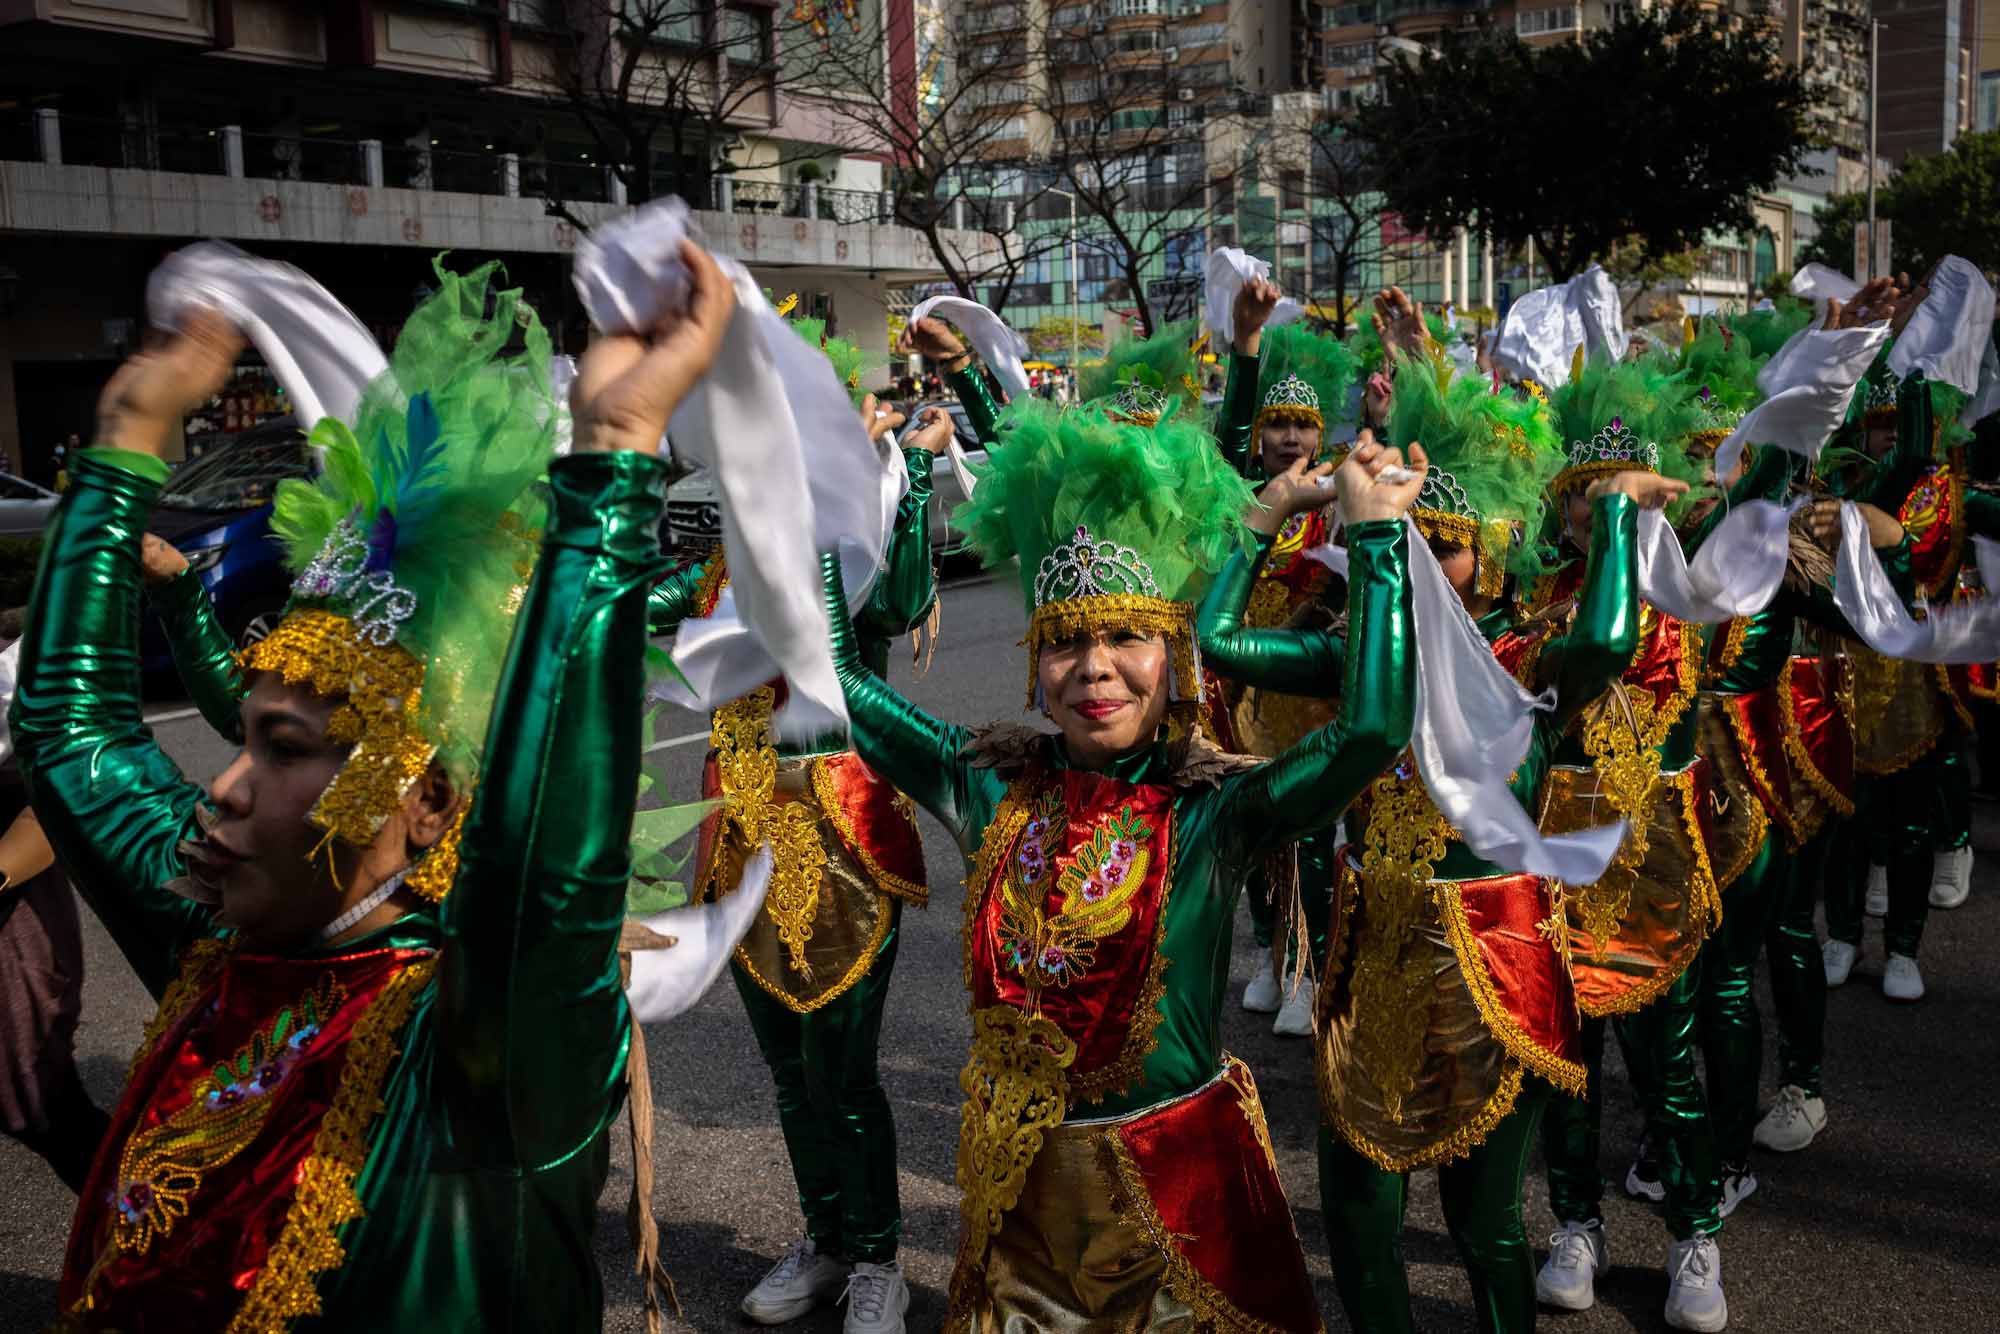 The Debutantes of Macau dance troupe takes part in the Sinulog procession